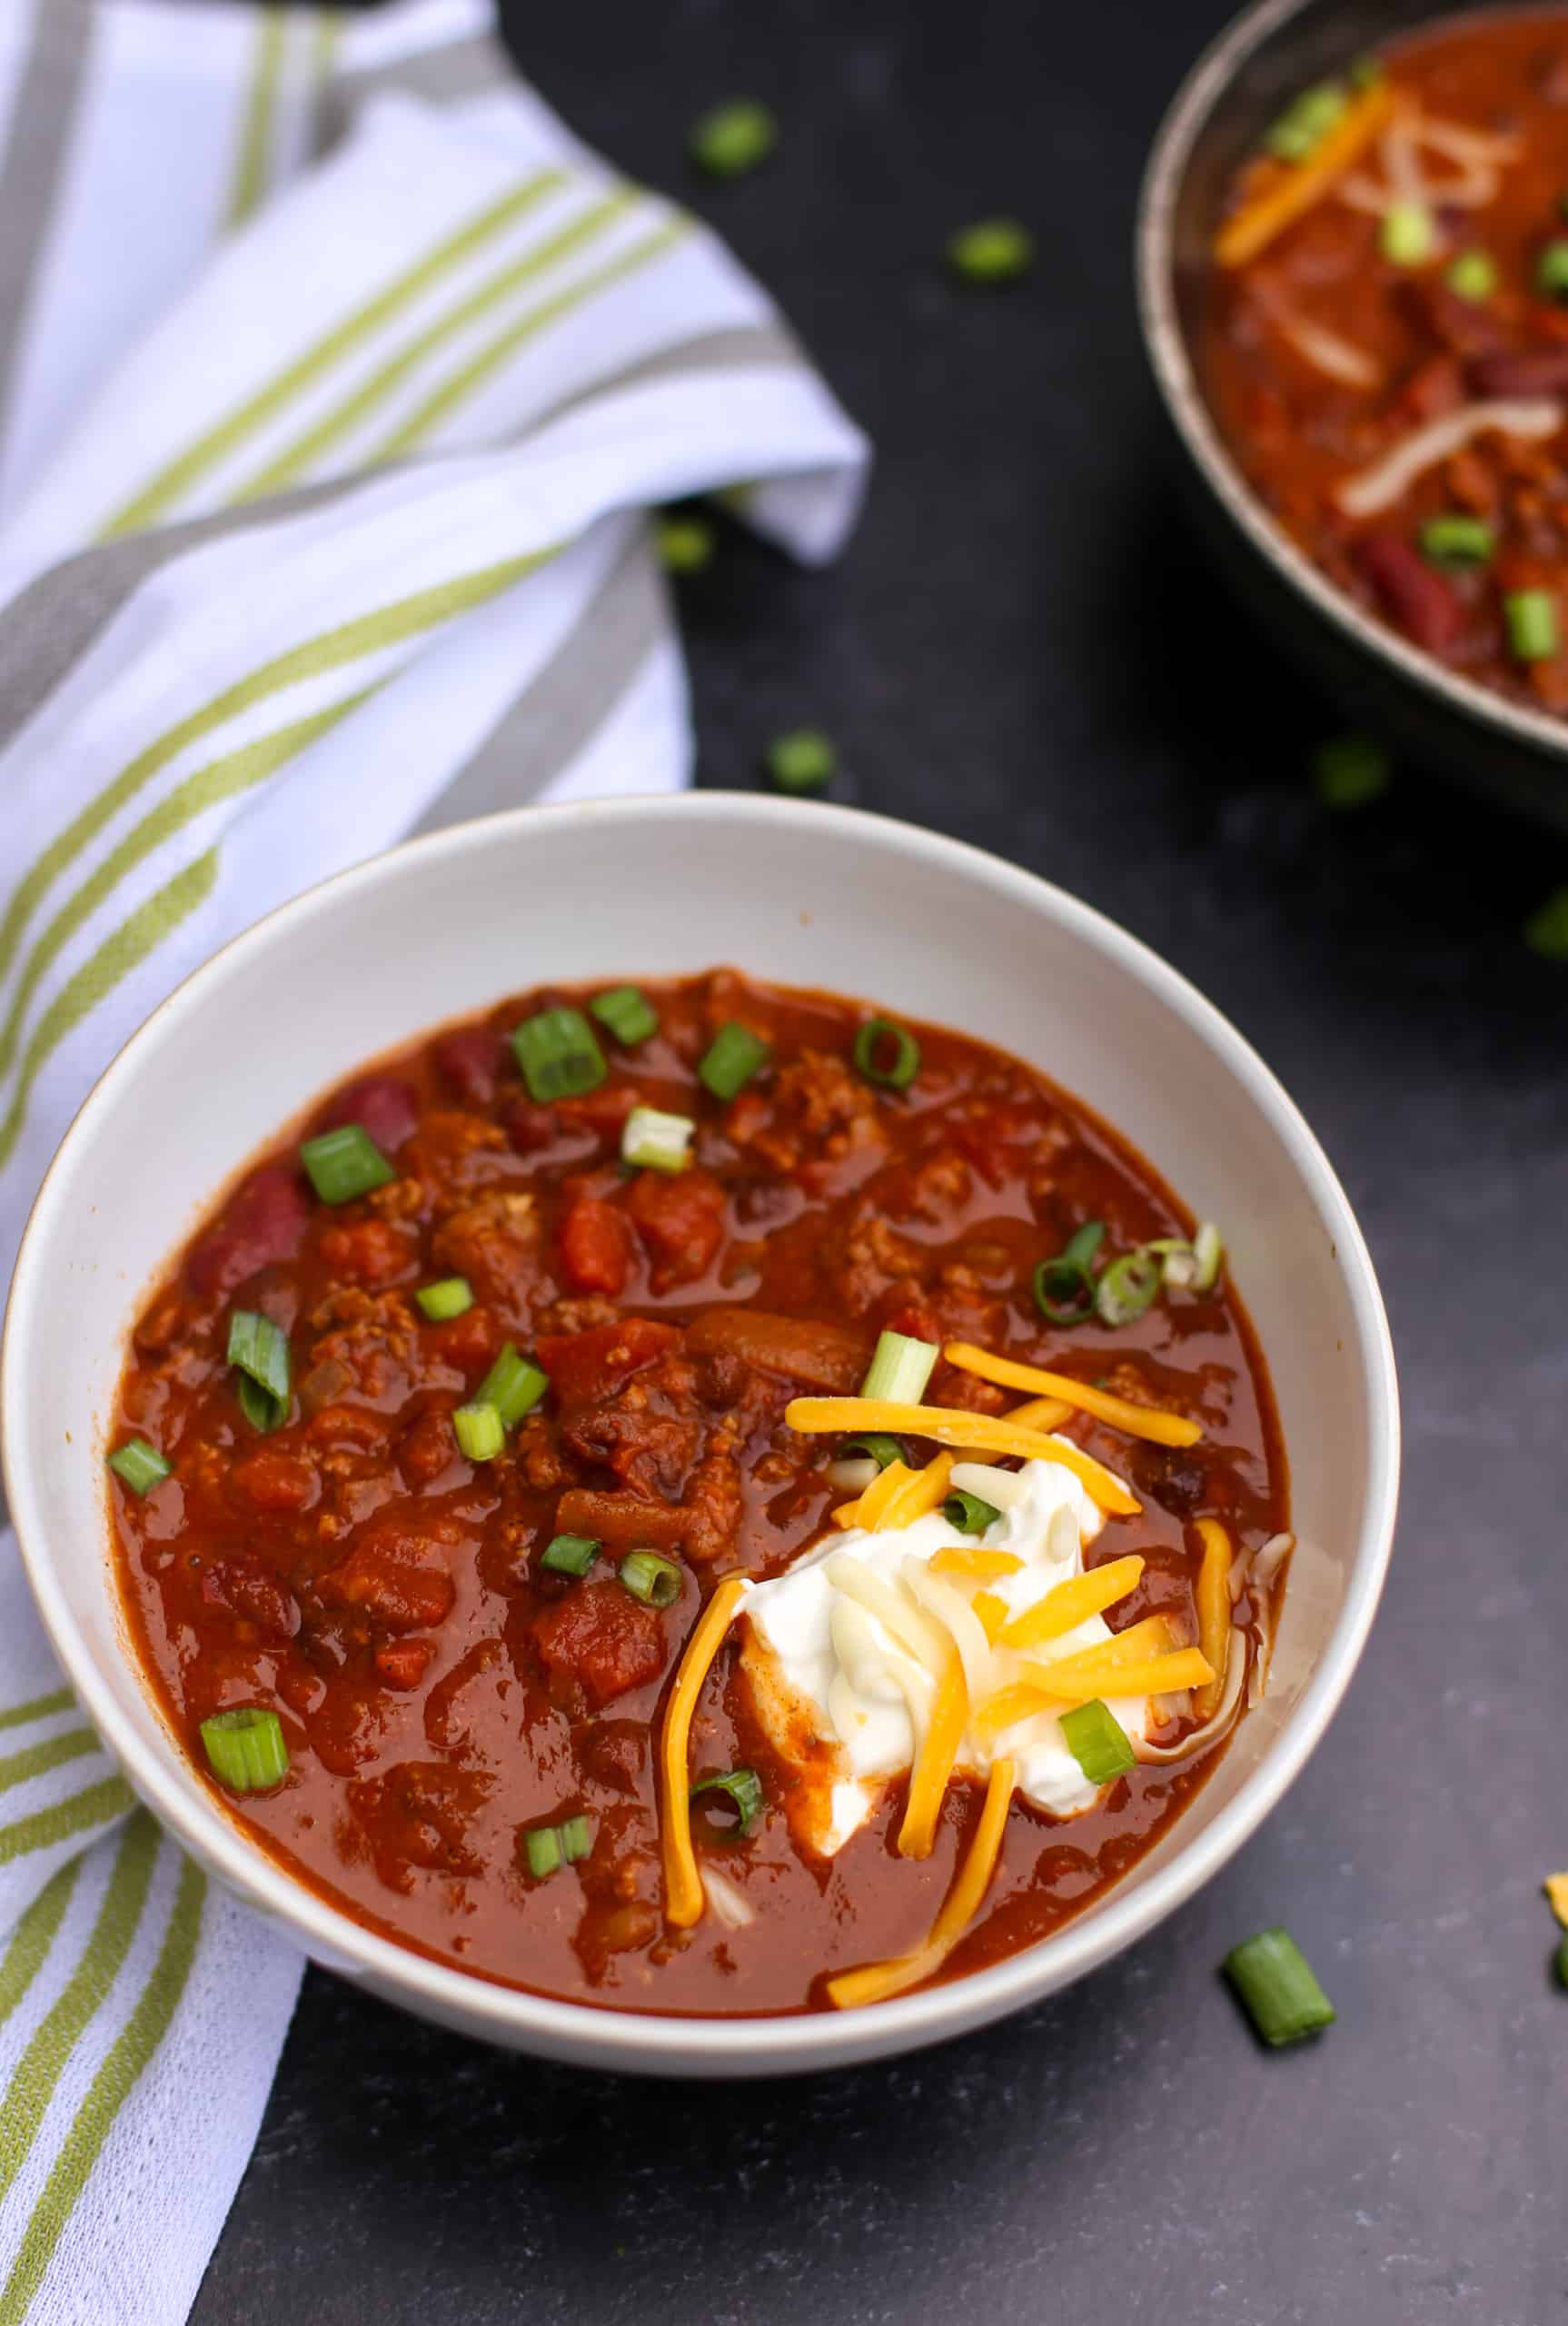 Curried Chili - The Defined Dish Recipes - Curried Chili